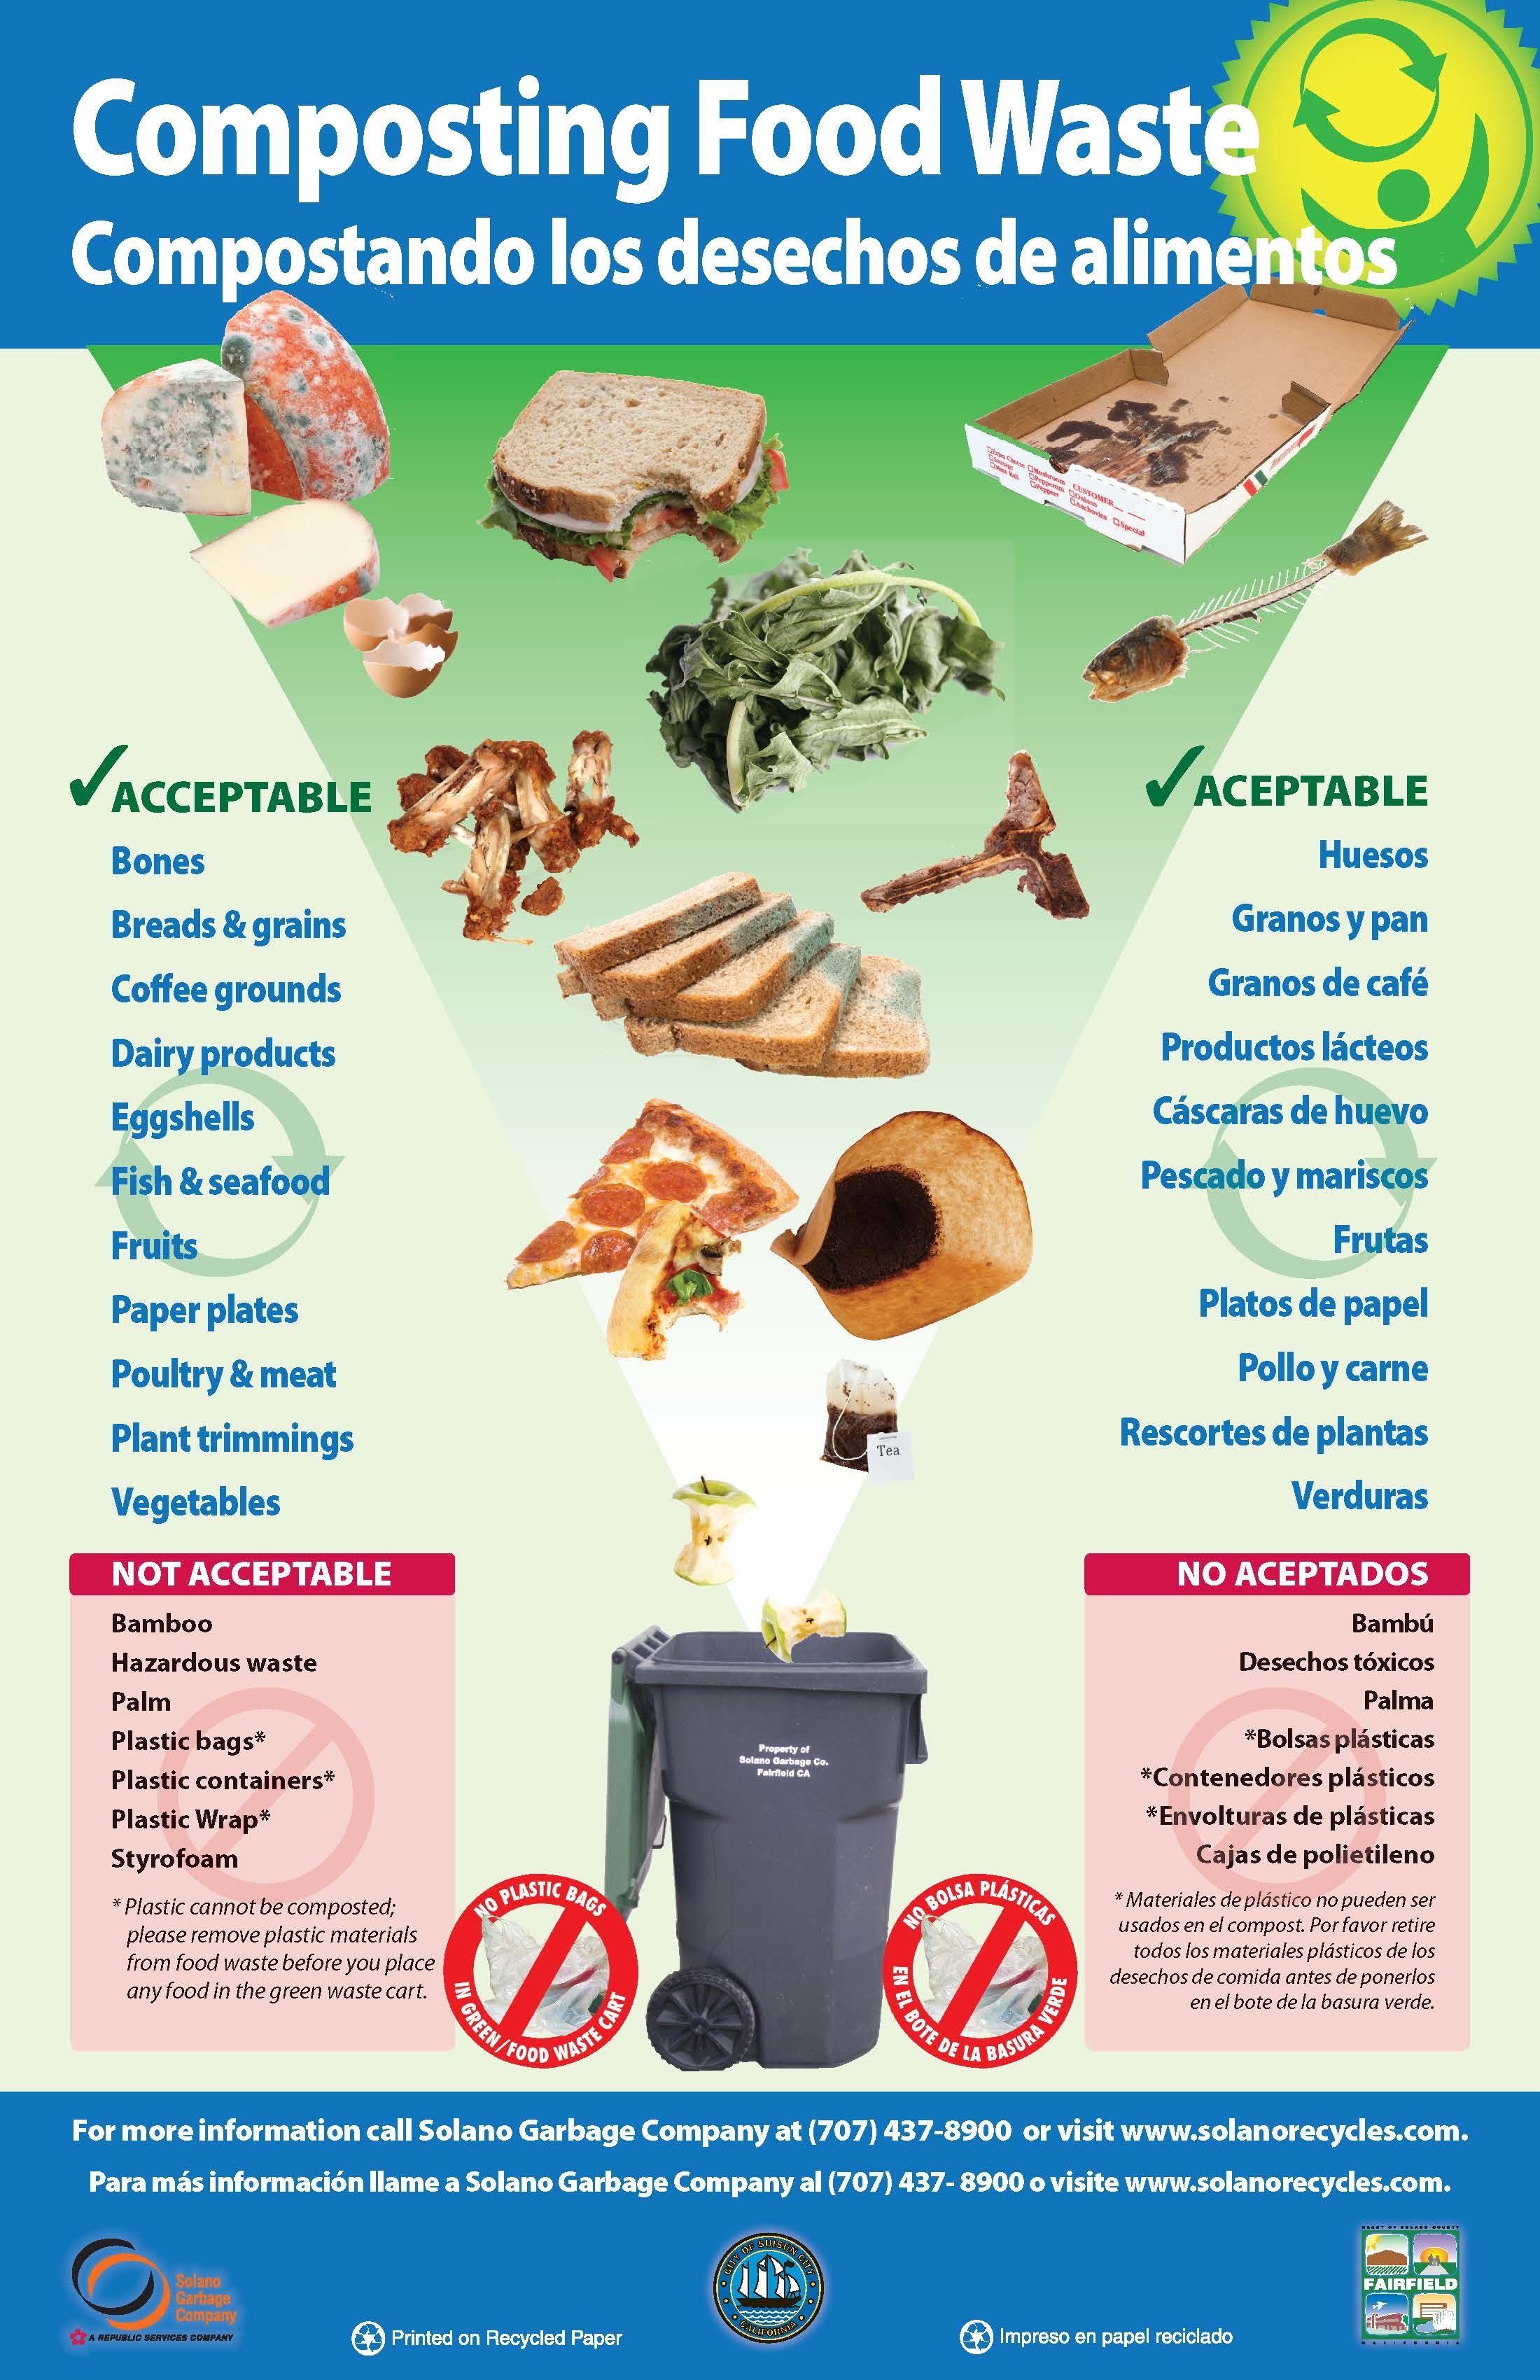 Yard Waste and Food Scraps-What Goes Into the Green Bin? - Under